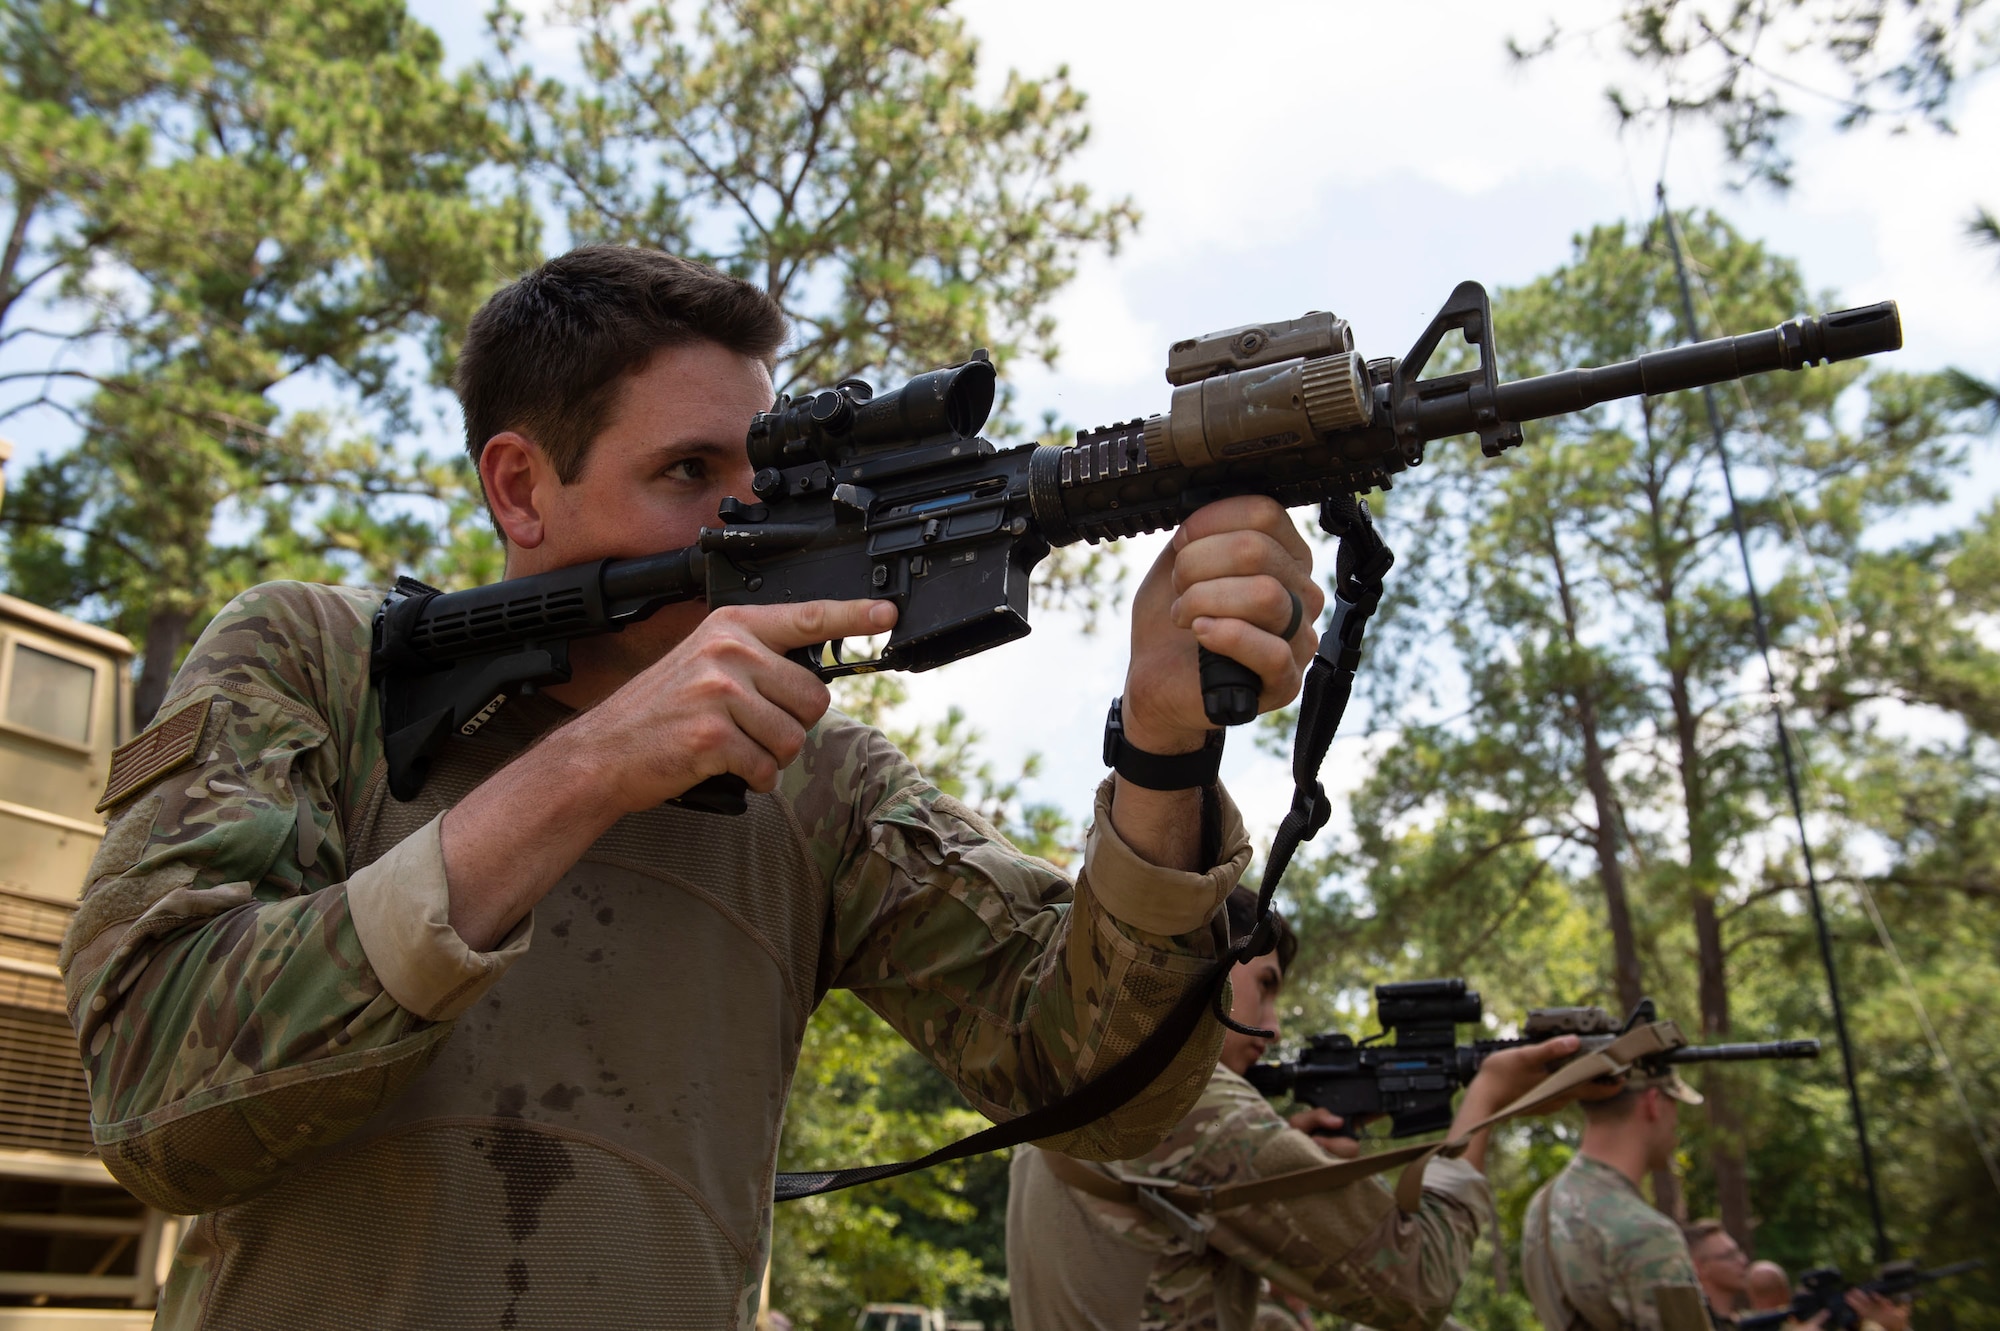 Senior Airman Tristan Wiese, 824th Base Defense Squadron fire team member, aims down his sight during the Tactical Leaders Course, Aug. 10, 2019, at Moody Air Force Base, Ga. The 7-day course revolved around squad leaders developing their skills to effectively communicate, team build and mission plan. These skills were assessed during a 36-hour simulated operation where squad leaders lead Airmen through tactical situations. (U.S. Air Force photo by Airman Azaria E. Foster)